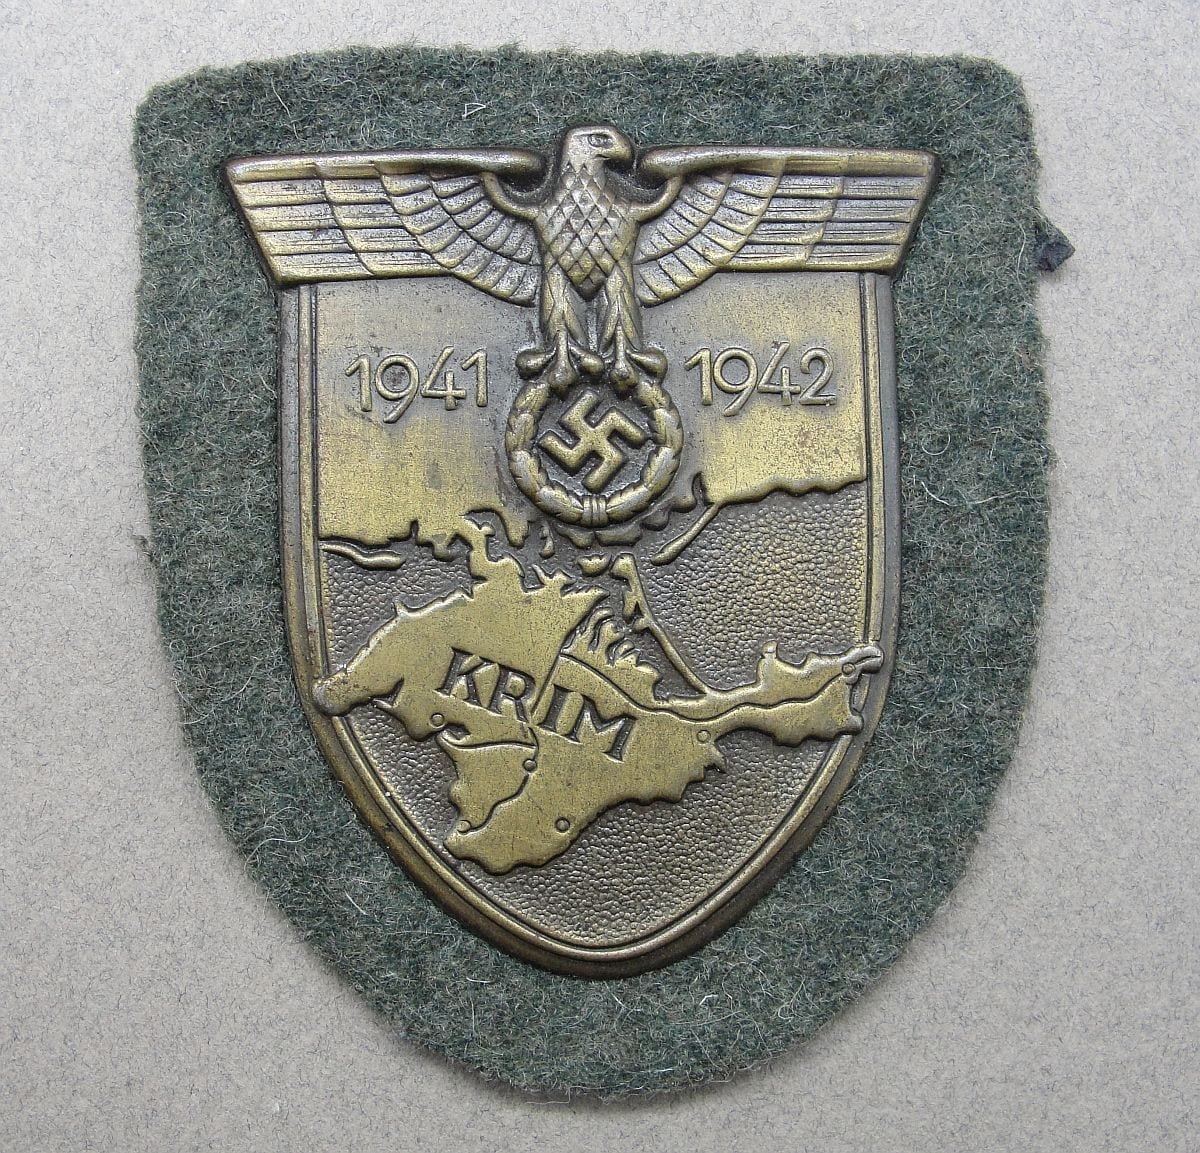 KRIM Shield on Army/Waffen-SS Backing by J.F.S.